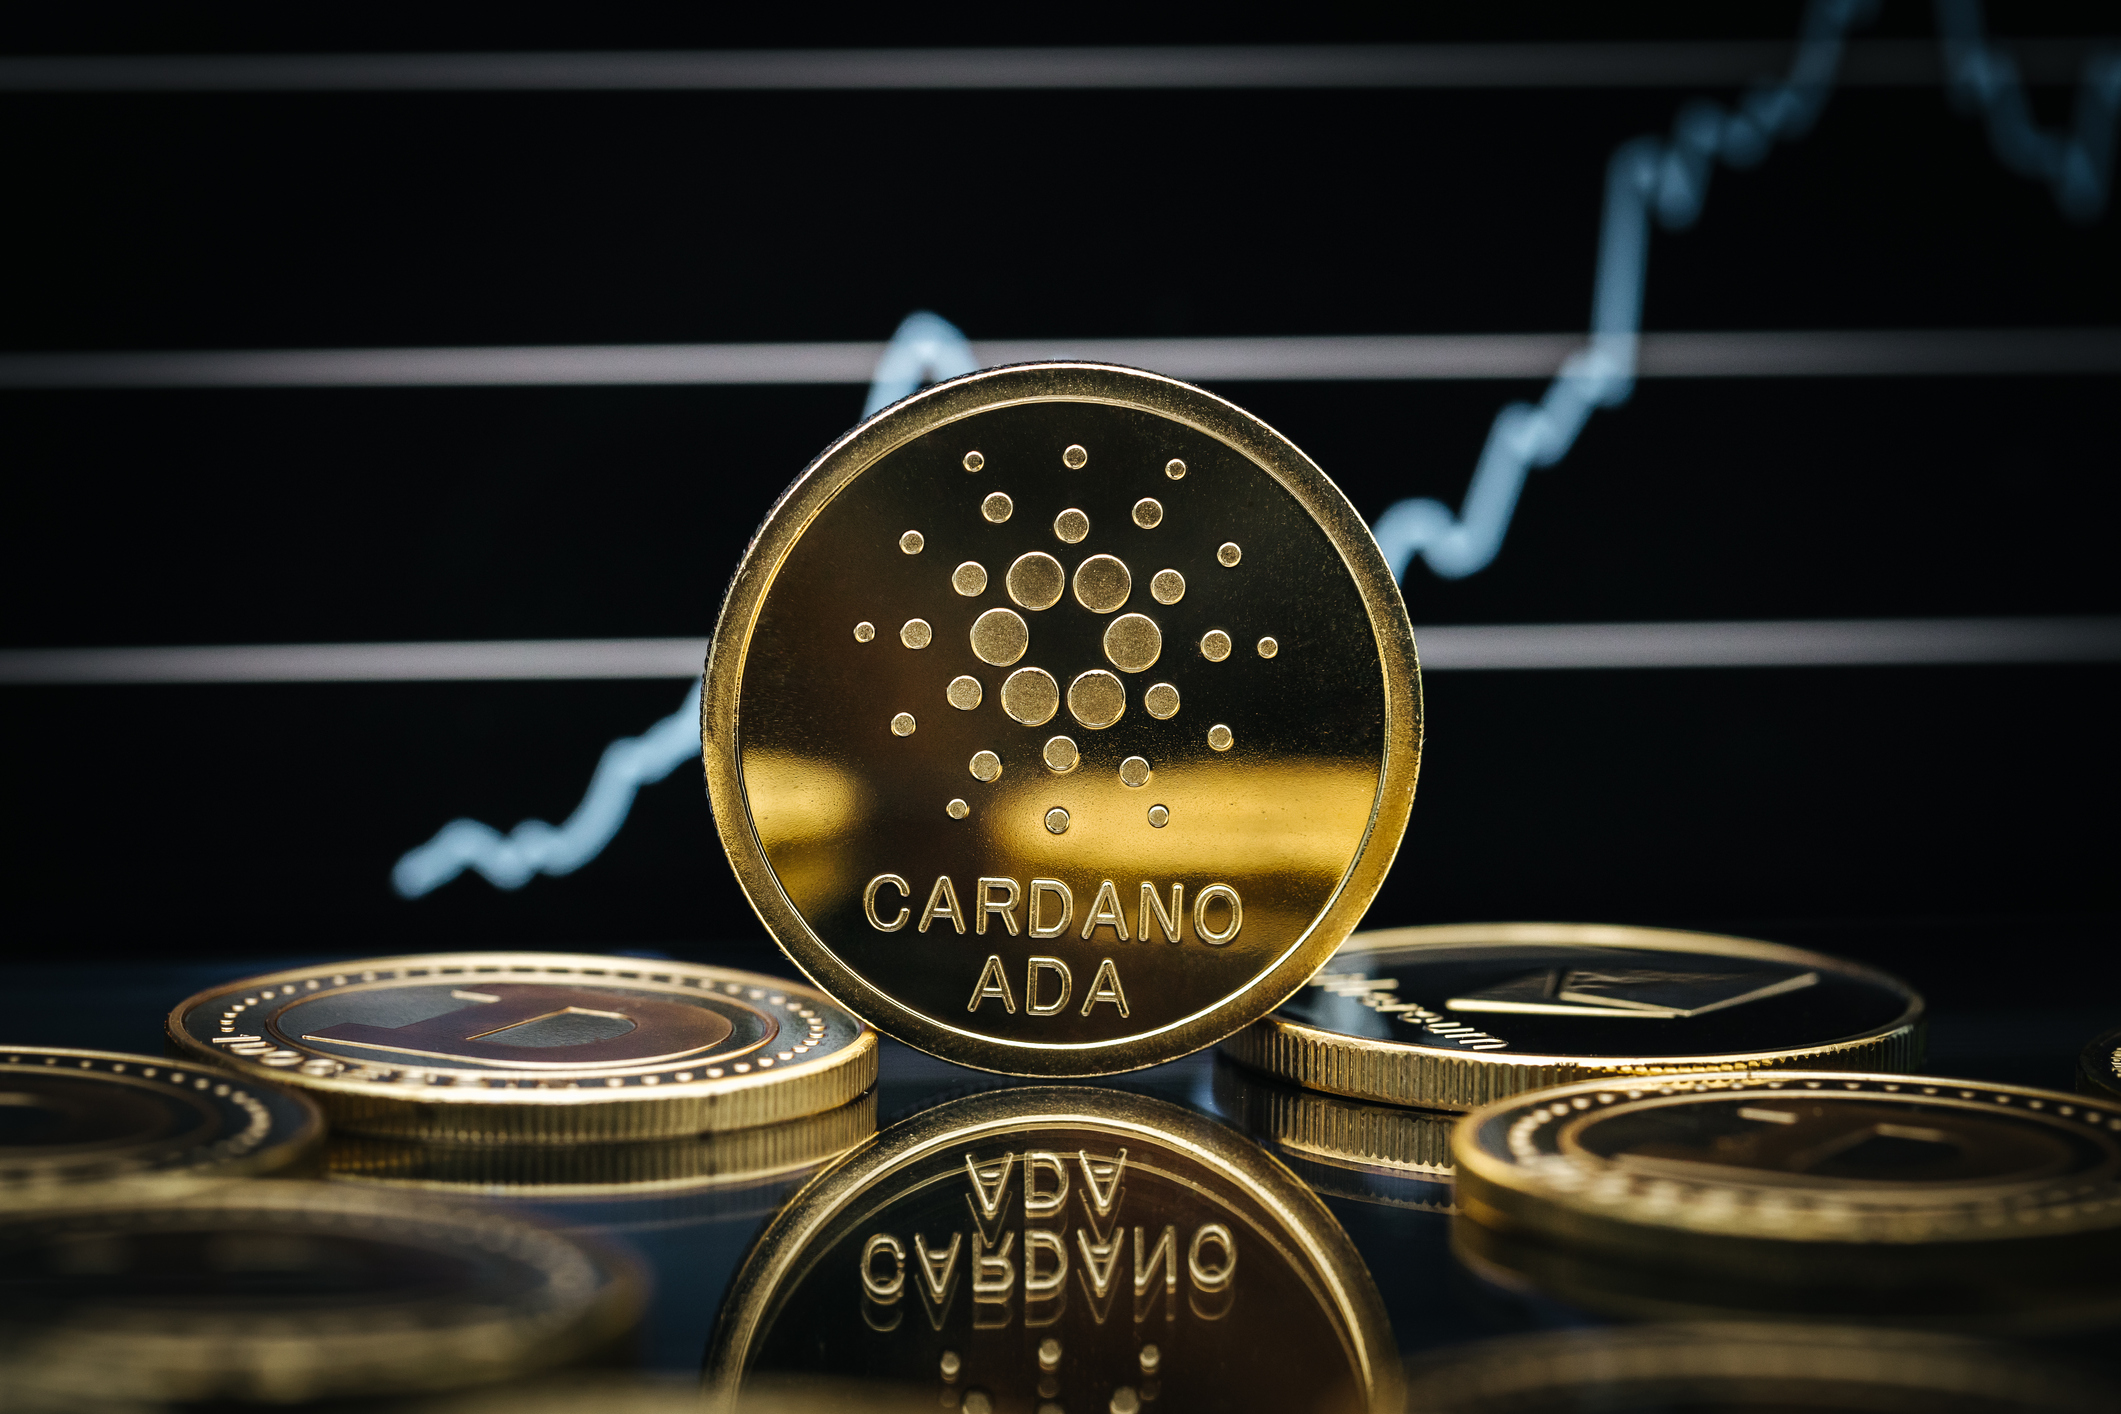 Cardano Ada cryptocurrency coin close up, in front of a price chart